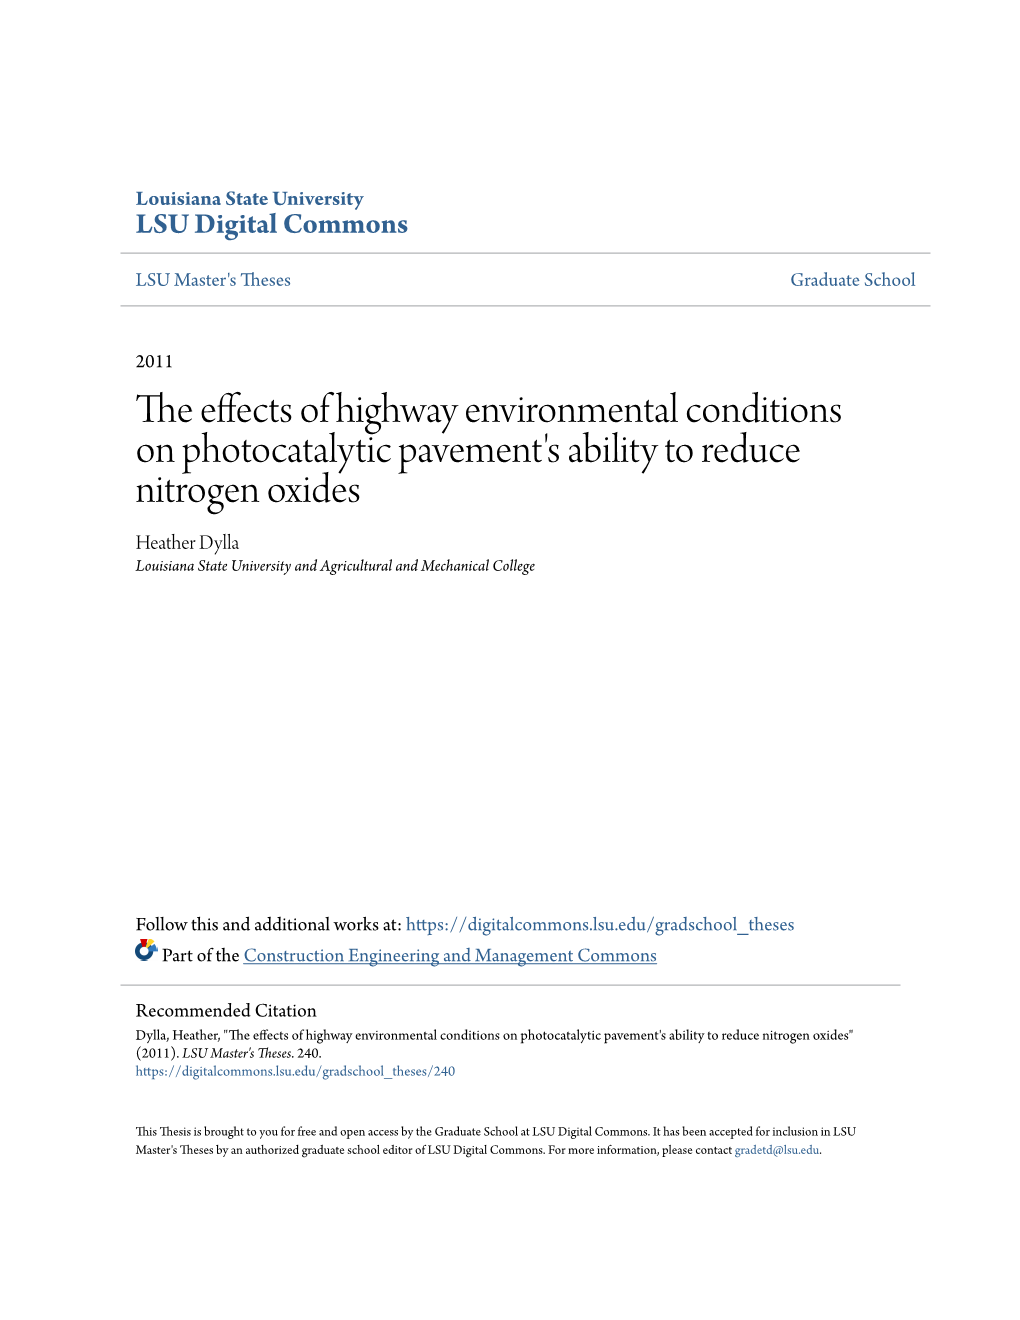 The Effects of Highway Environmental Conditions on Photocatalytic Pavement's Ability to Reduce Nitrogen Oxides